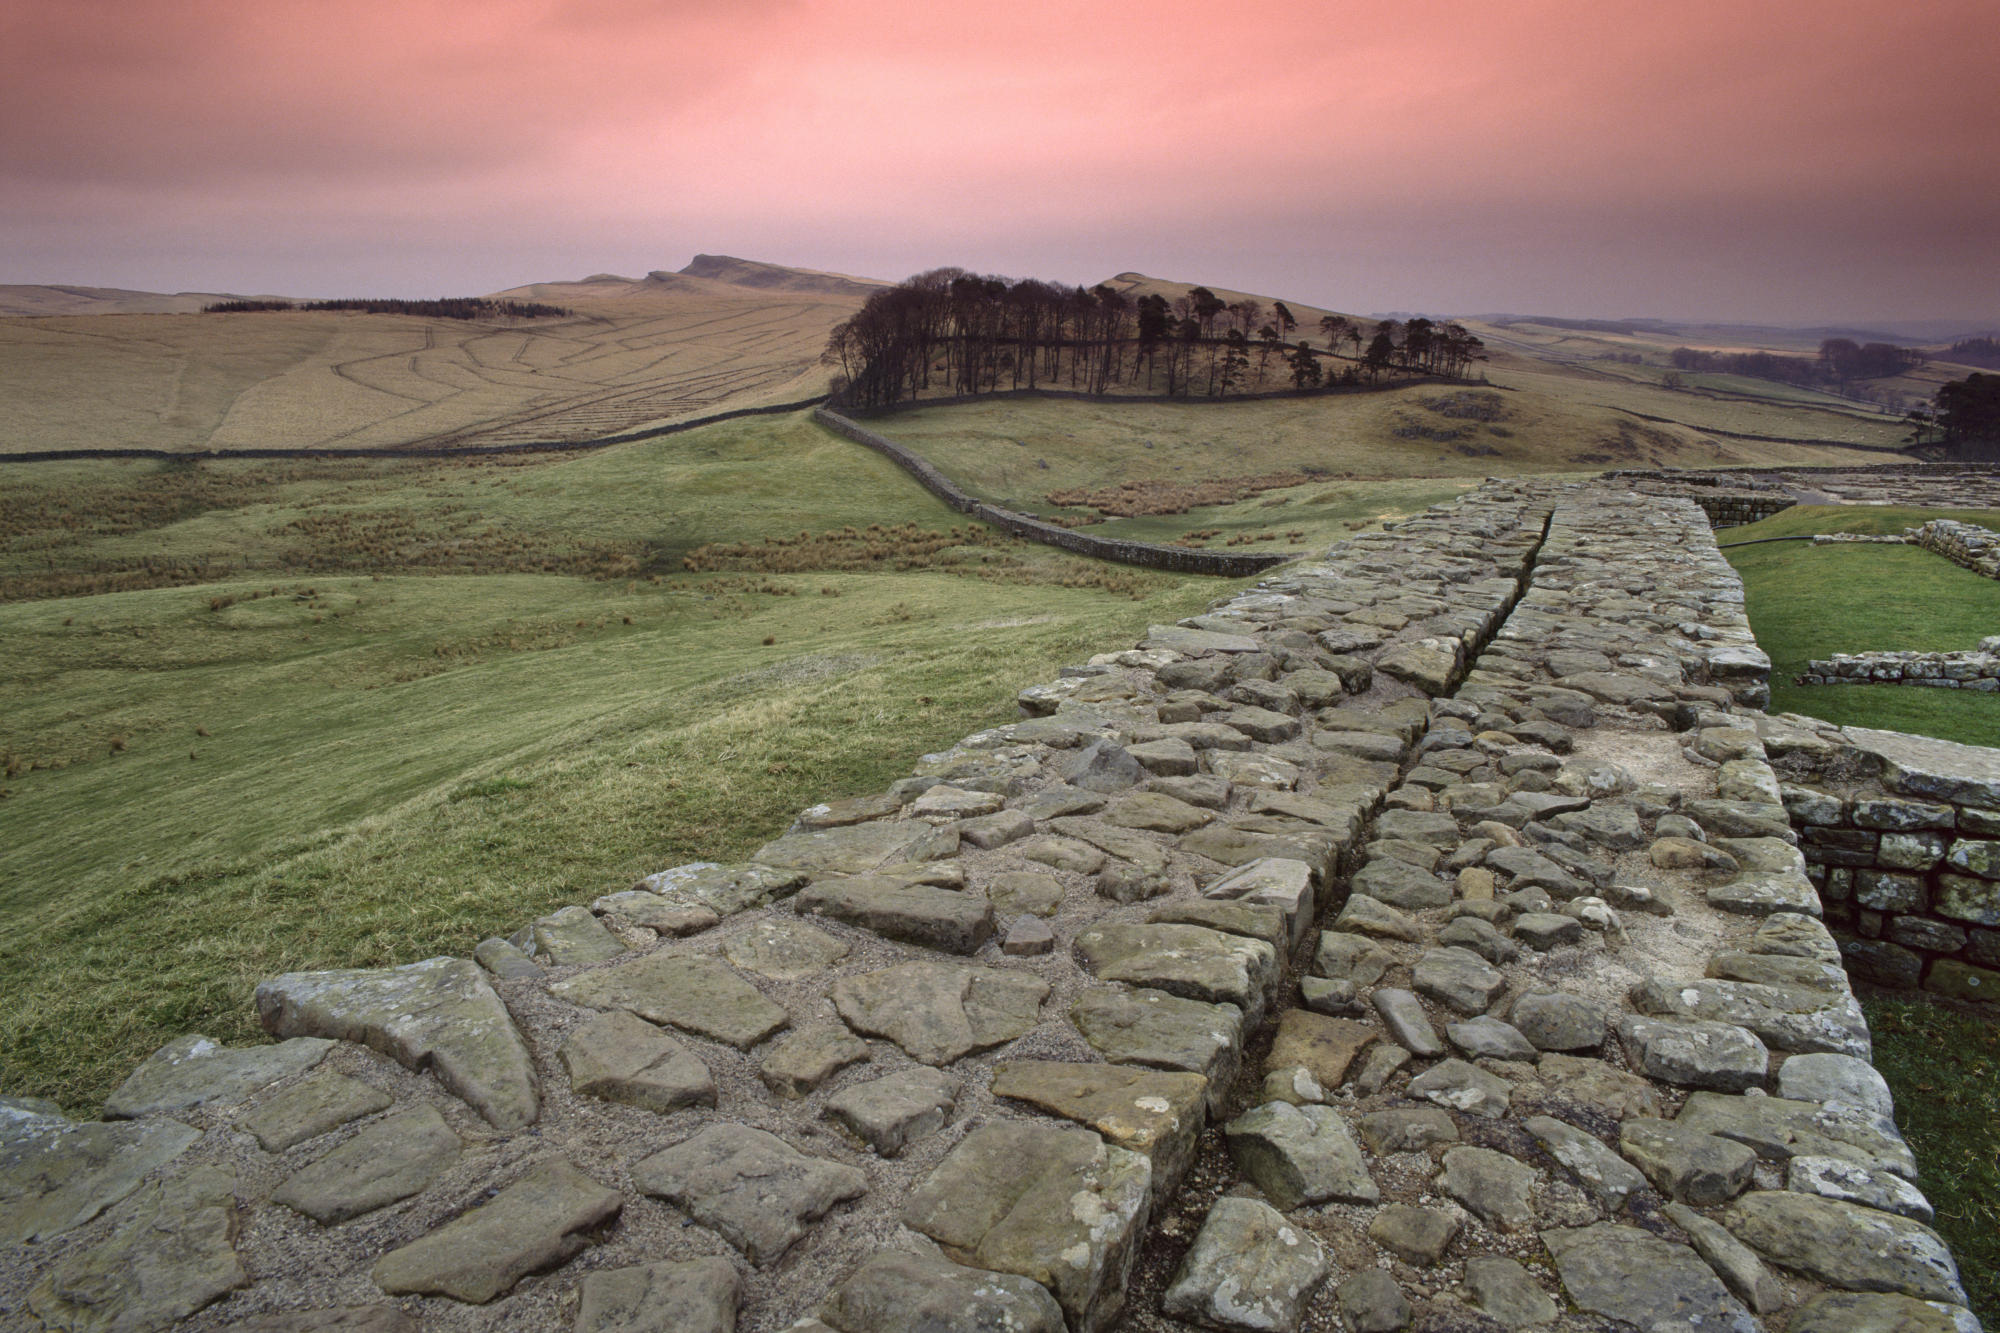 Hadrian's Wall – A Traveler's Perspective